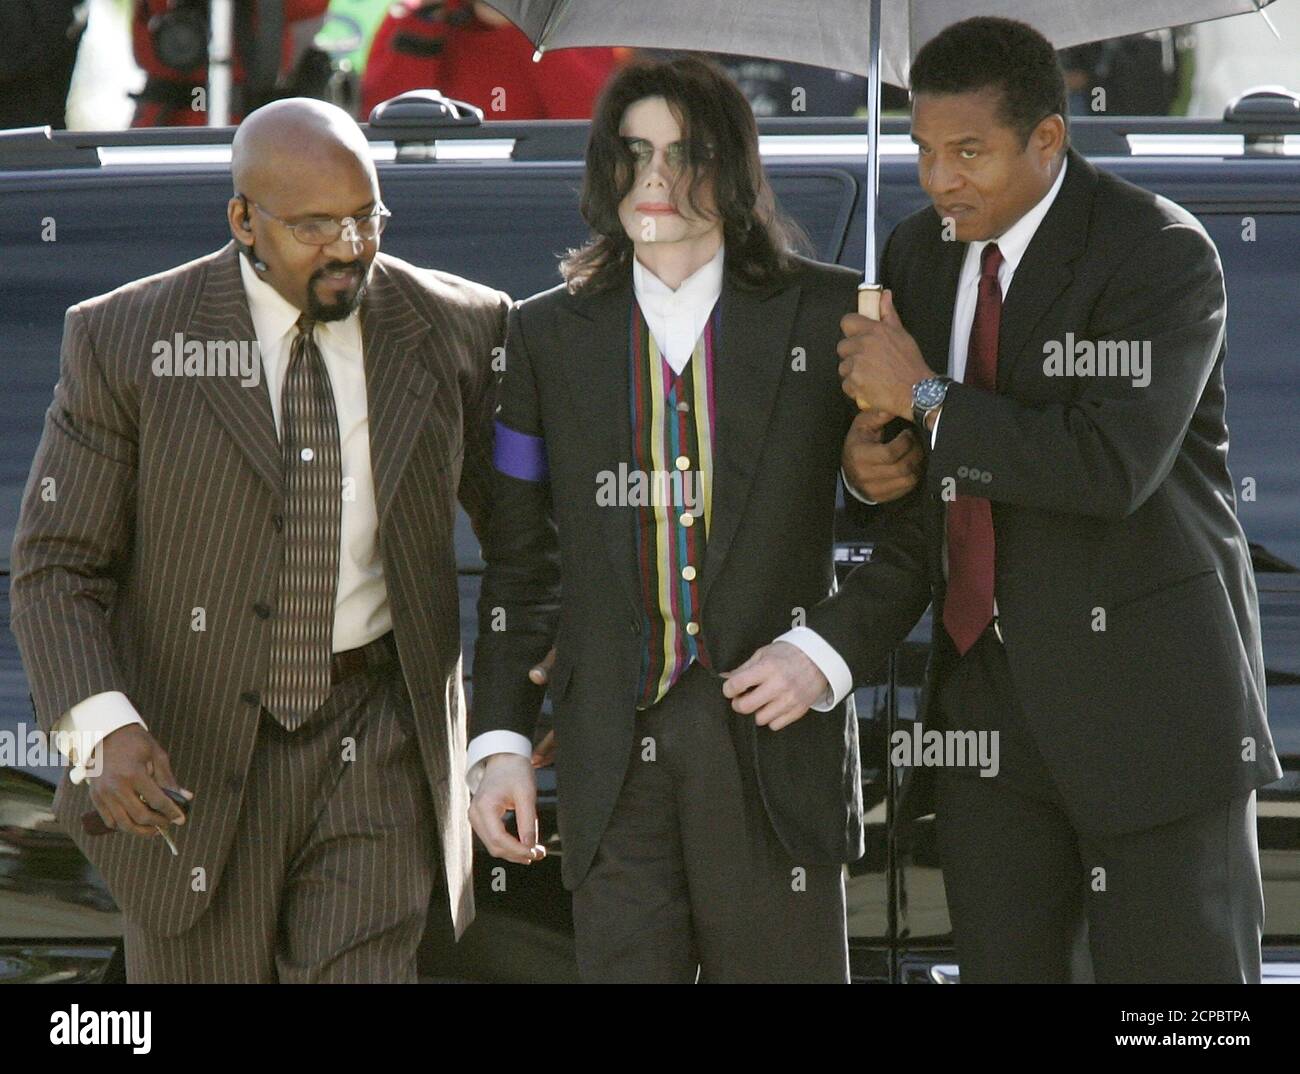 Pop star Michael Jackson is helped by his brother Jackie Jackson (R) and a  bodyguard (L) as he arrives at the Santa Barbara County Courthouse in Santa  Maria, California March 21, 2005.